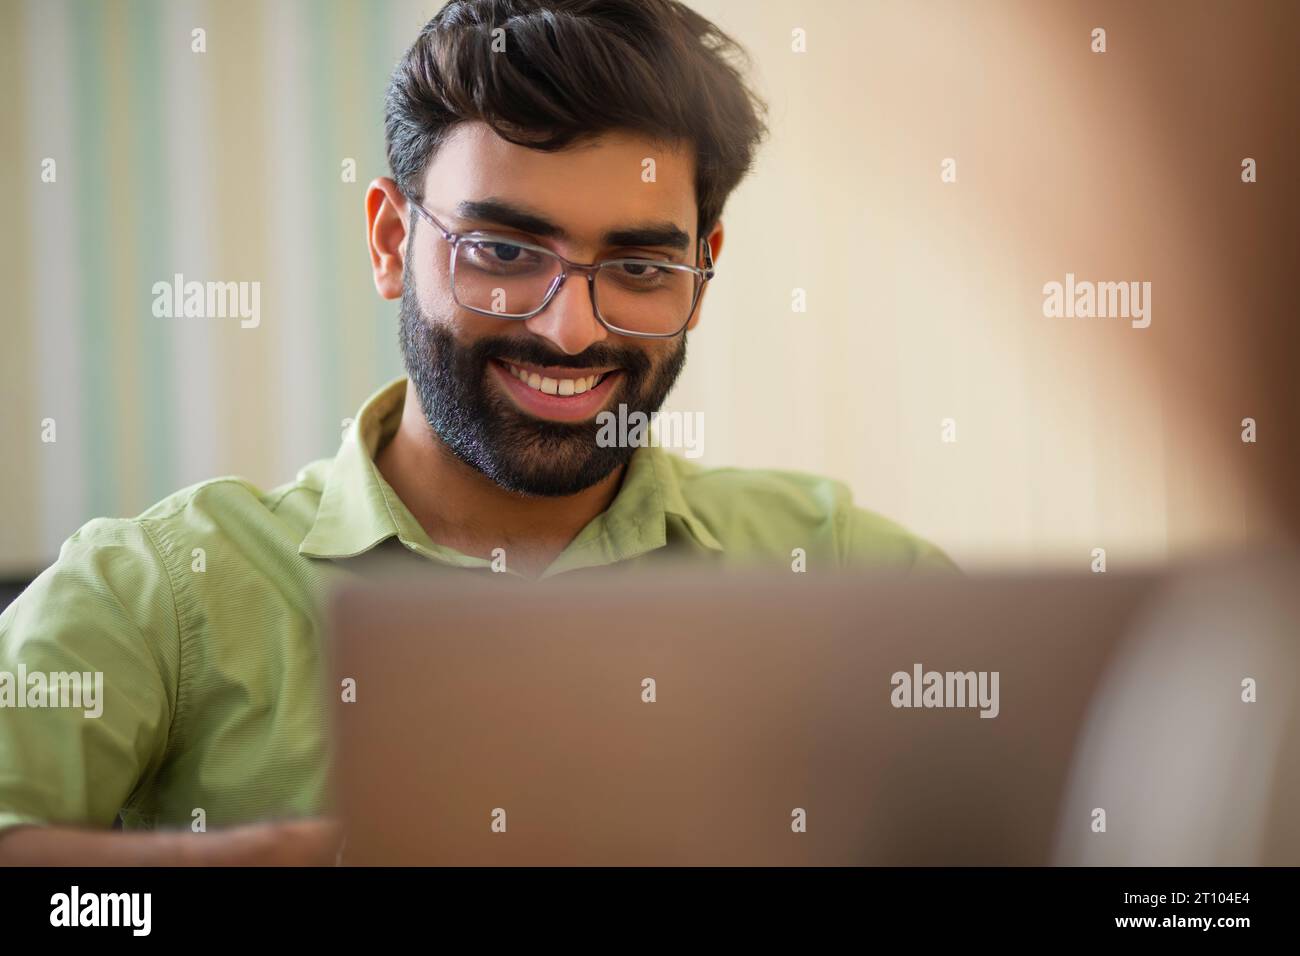 Close-up portrait of young man working with laptop in his home office Stock Photo